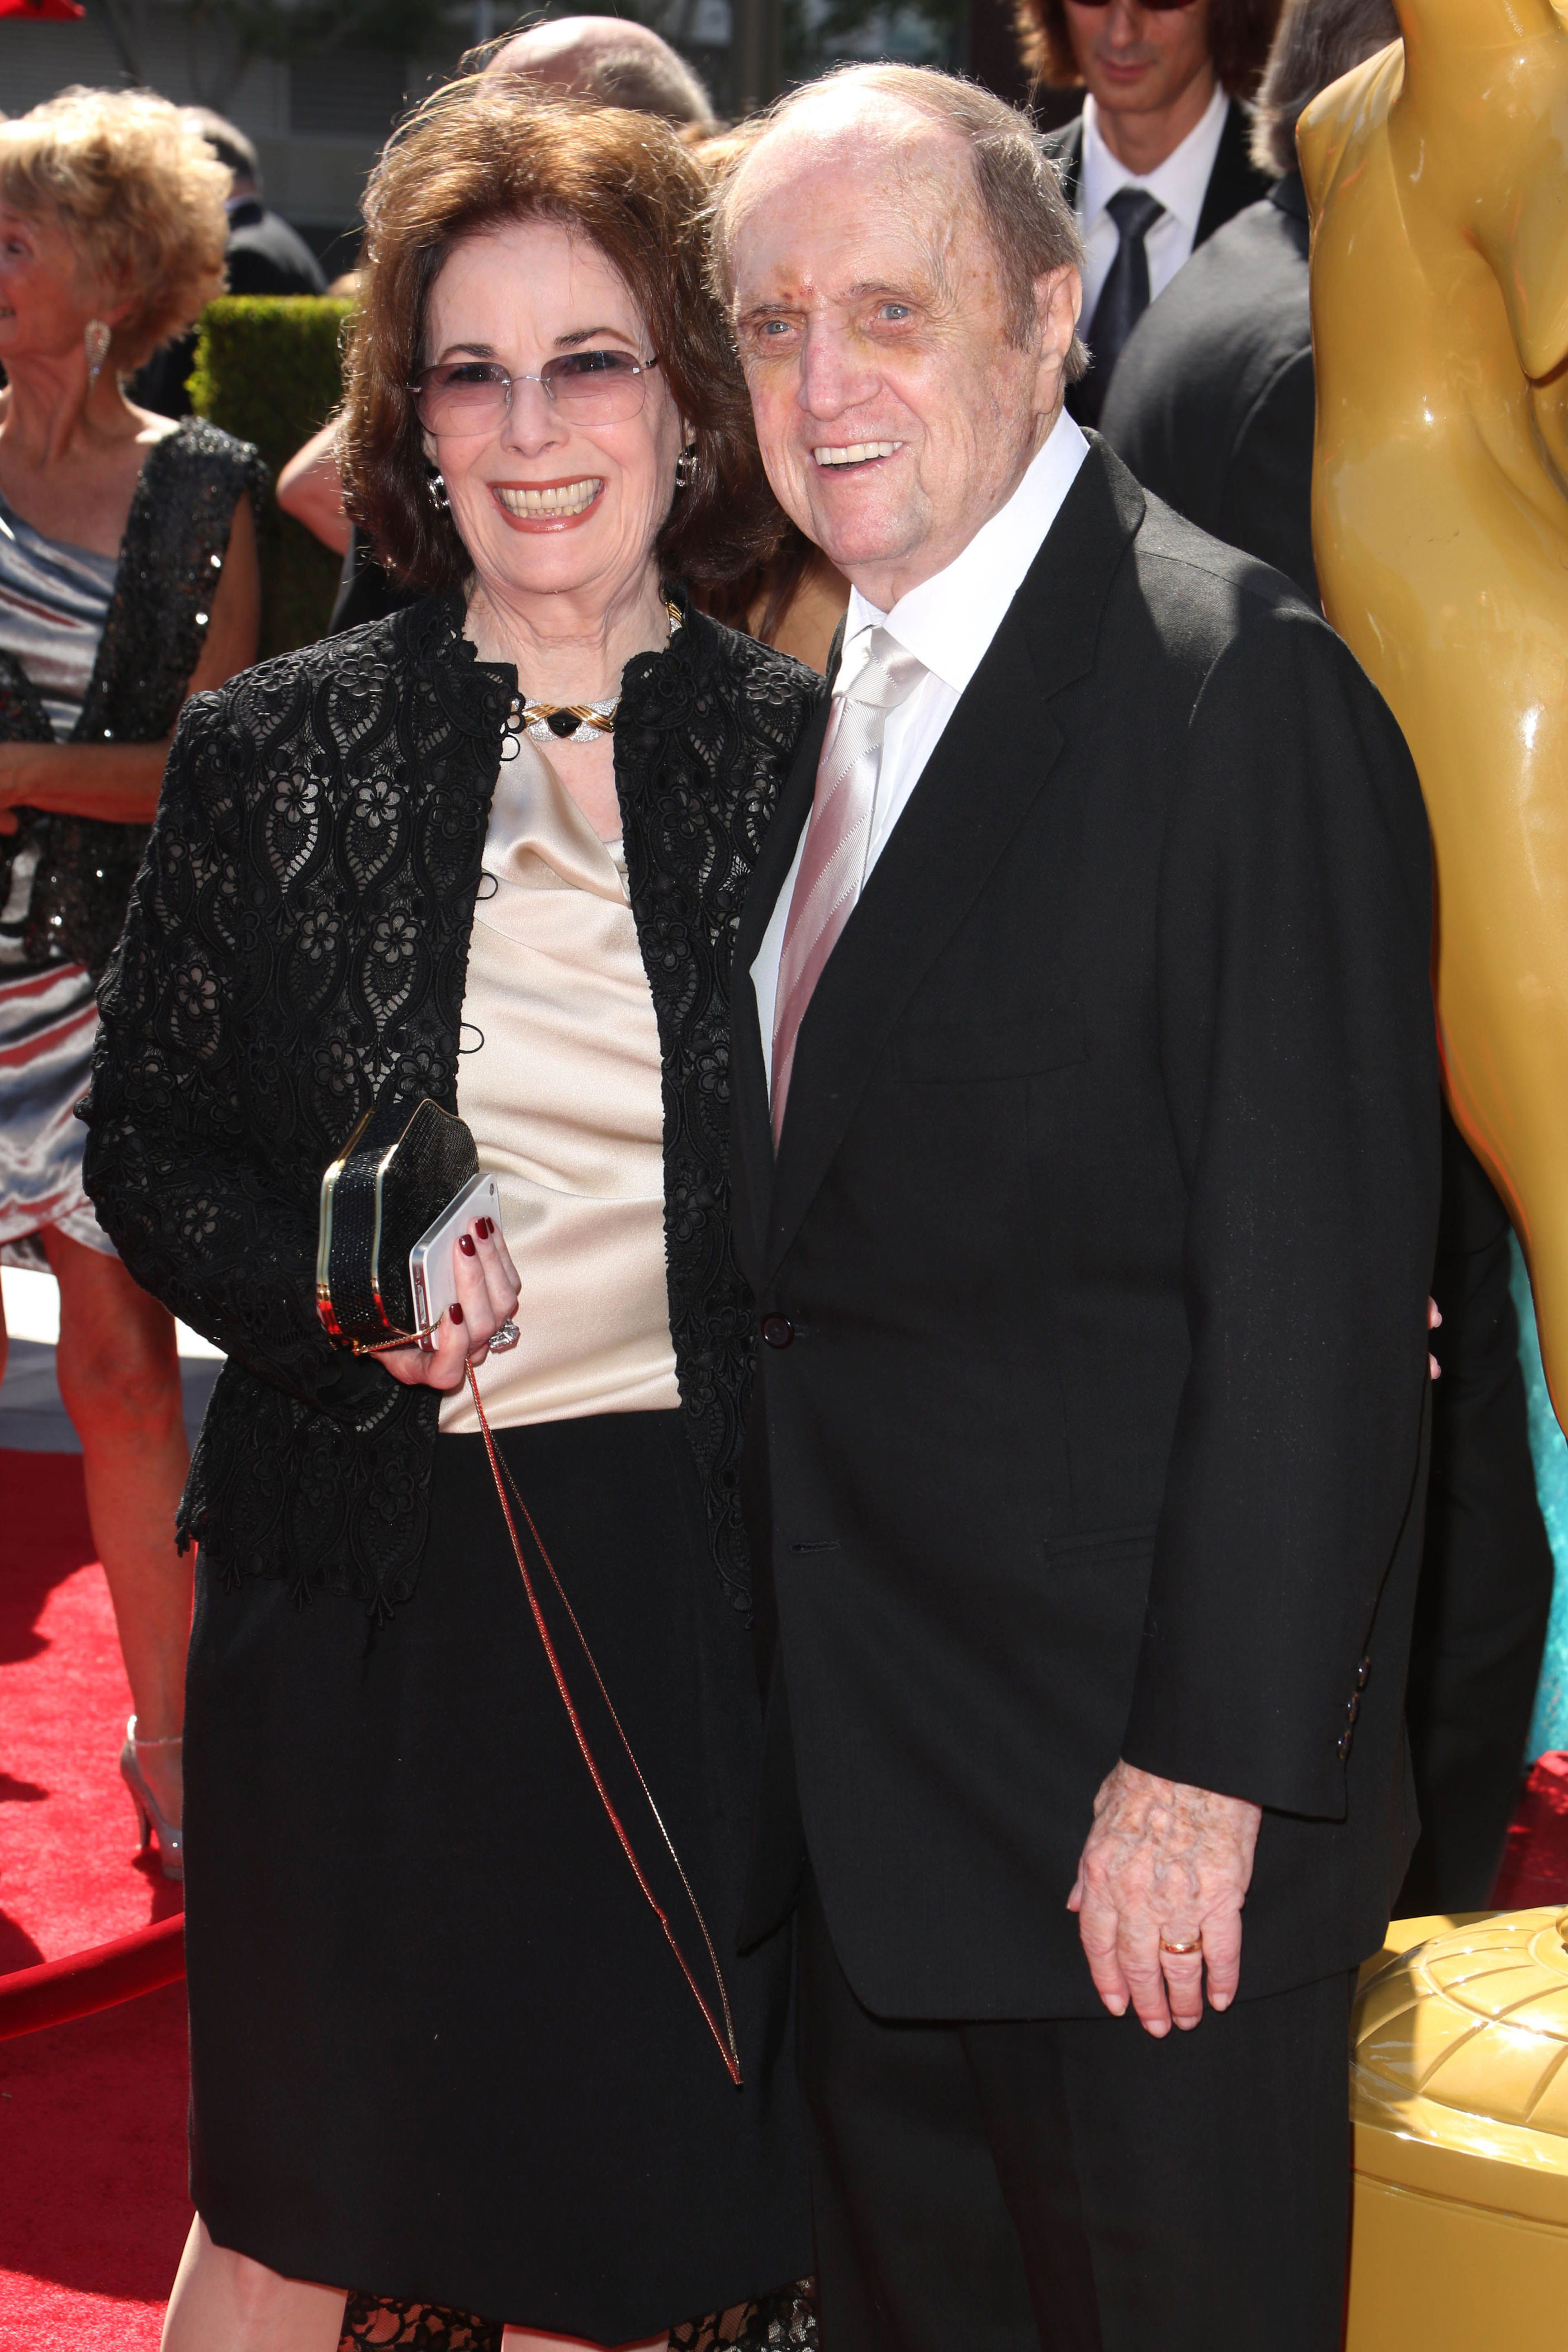 <p><span>Ginnie Newhart -- the wife of comedy legend Bob Newhart -- died on April 23, 2023, at 82. A rep for the family confirmed to People magazine that she passed after a long illness. Bob took to Twitter to mourn his wife of more than 60 years, writing, "She was our rock and we miss her terribly.</span></p>